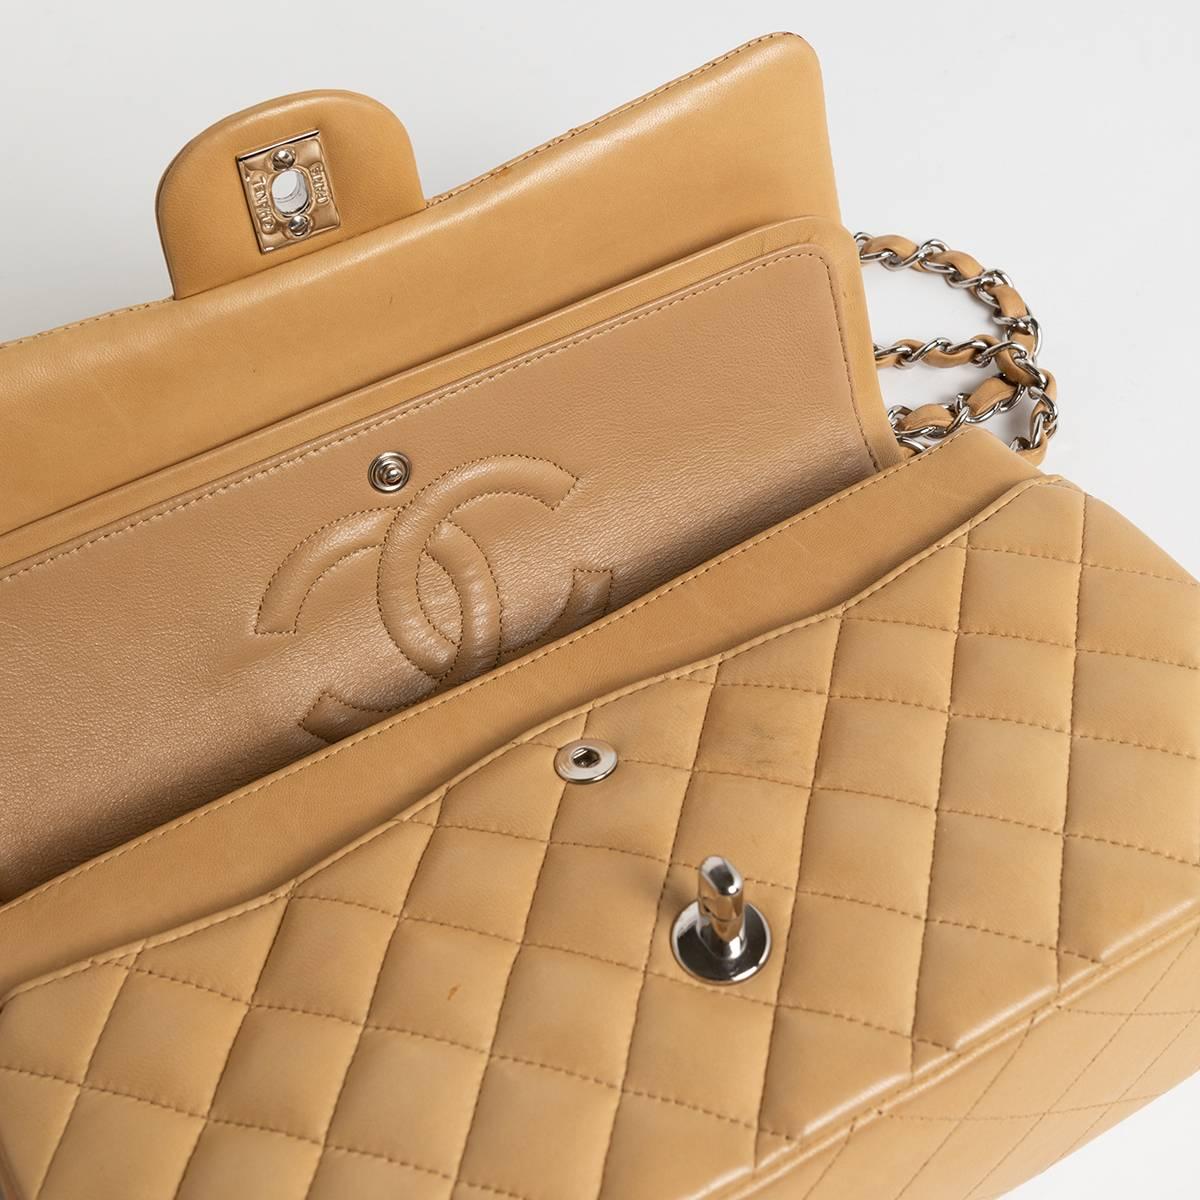 2005 Chanel 2.55 Quilted Matelasse Beige Lambskin  For Sale 9